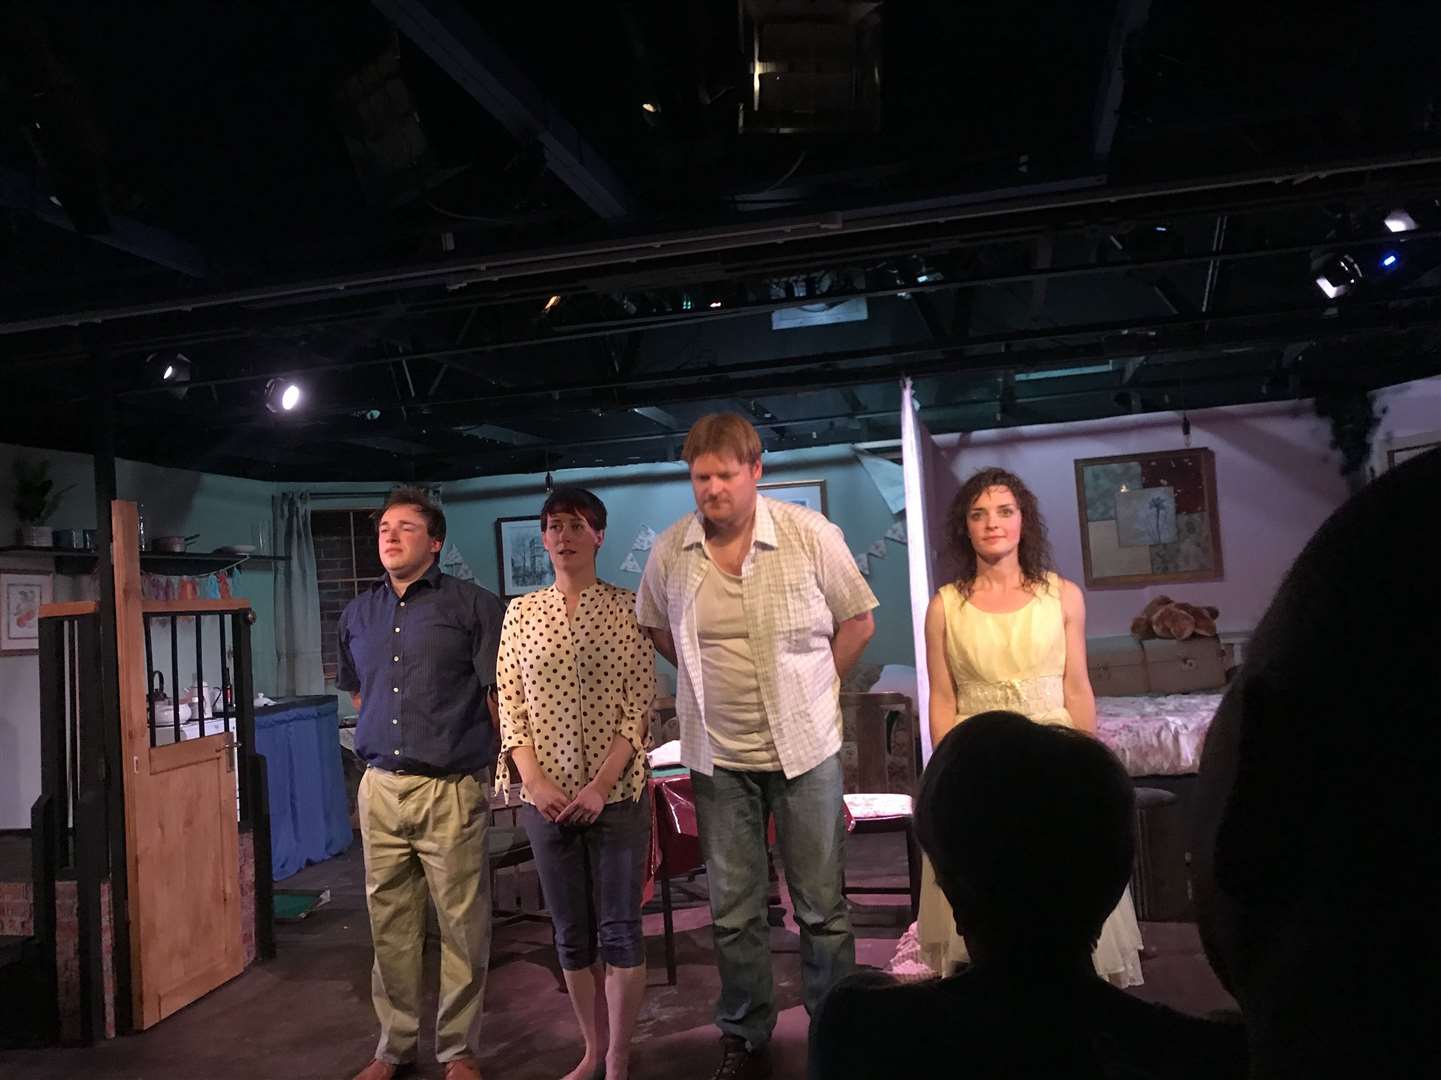 The Florians – from left – David Saunders, Rosalyn Paton, Simon Lyall and Alison Ozog.